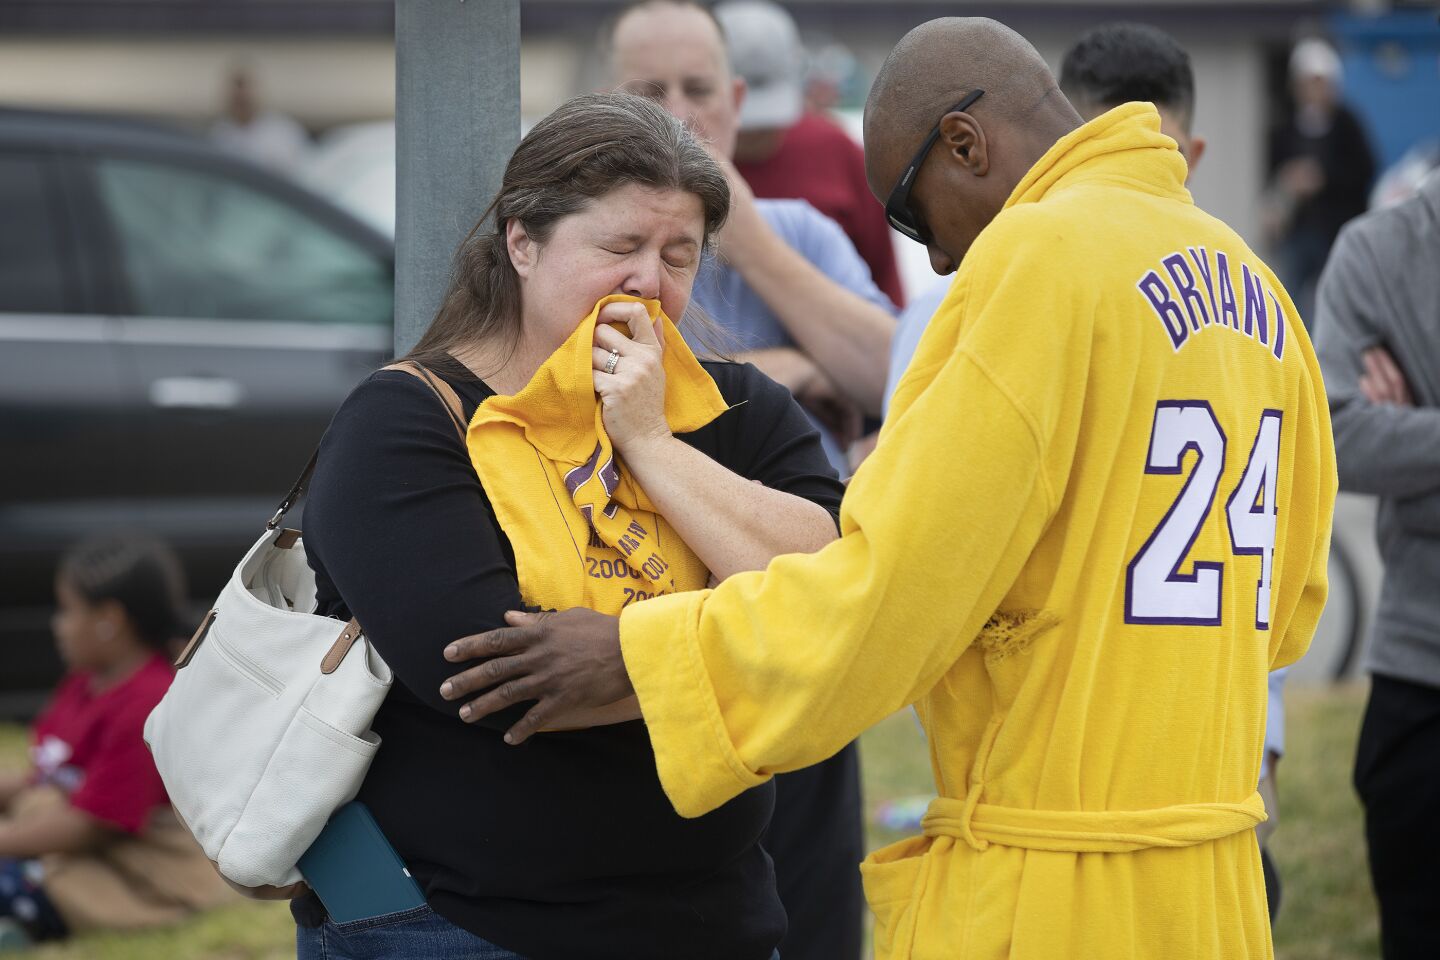 Amanda Gordon and her husband, Philip, mourn the death of Lakers legend Kobe Bryant near the helicopter crash site in Calabasas.